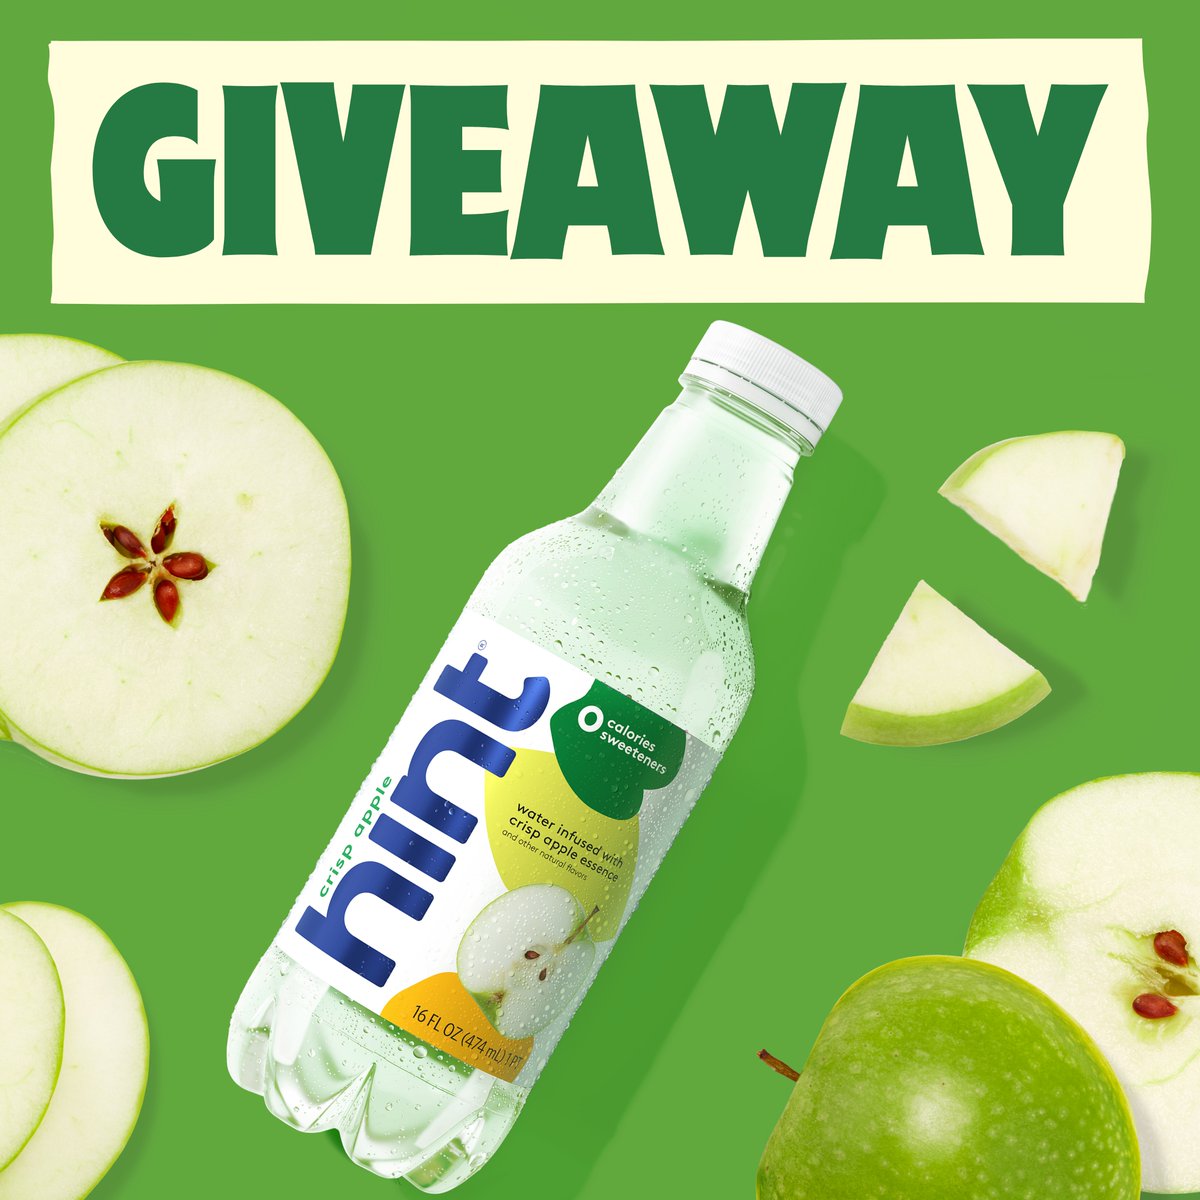 Here's something to fall for... a Crisp Apple Hint giveaway! 🍁 In honor of #NationalAppleDay, we're giving away a case of our popular fall flavor to one lucky winner. RT this tweet for a chance to win. 🍏🙌 #HintWater #Giveaway ends 10/30. Winner notified via DM 11/1.